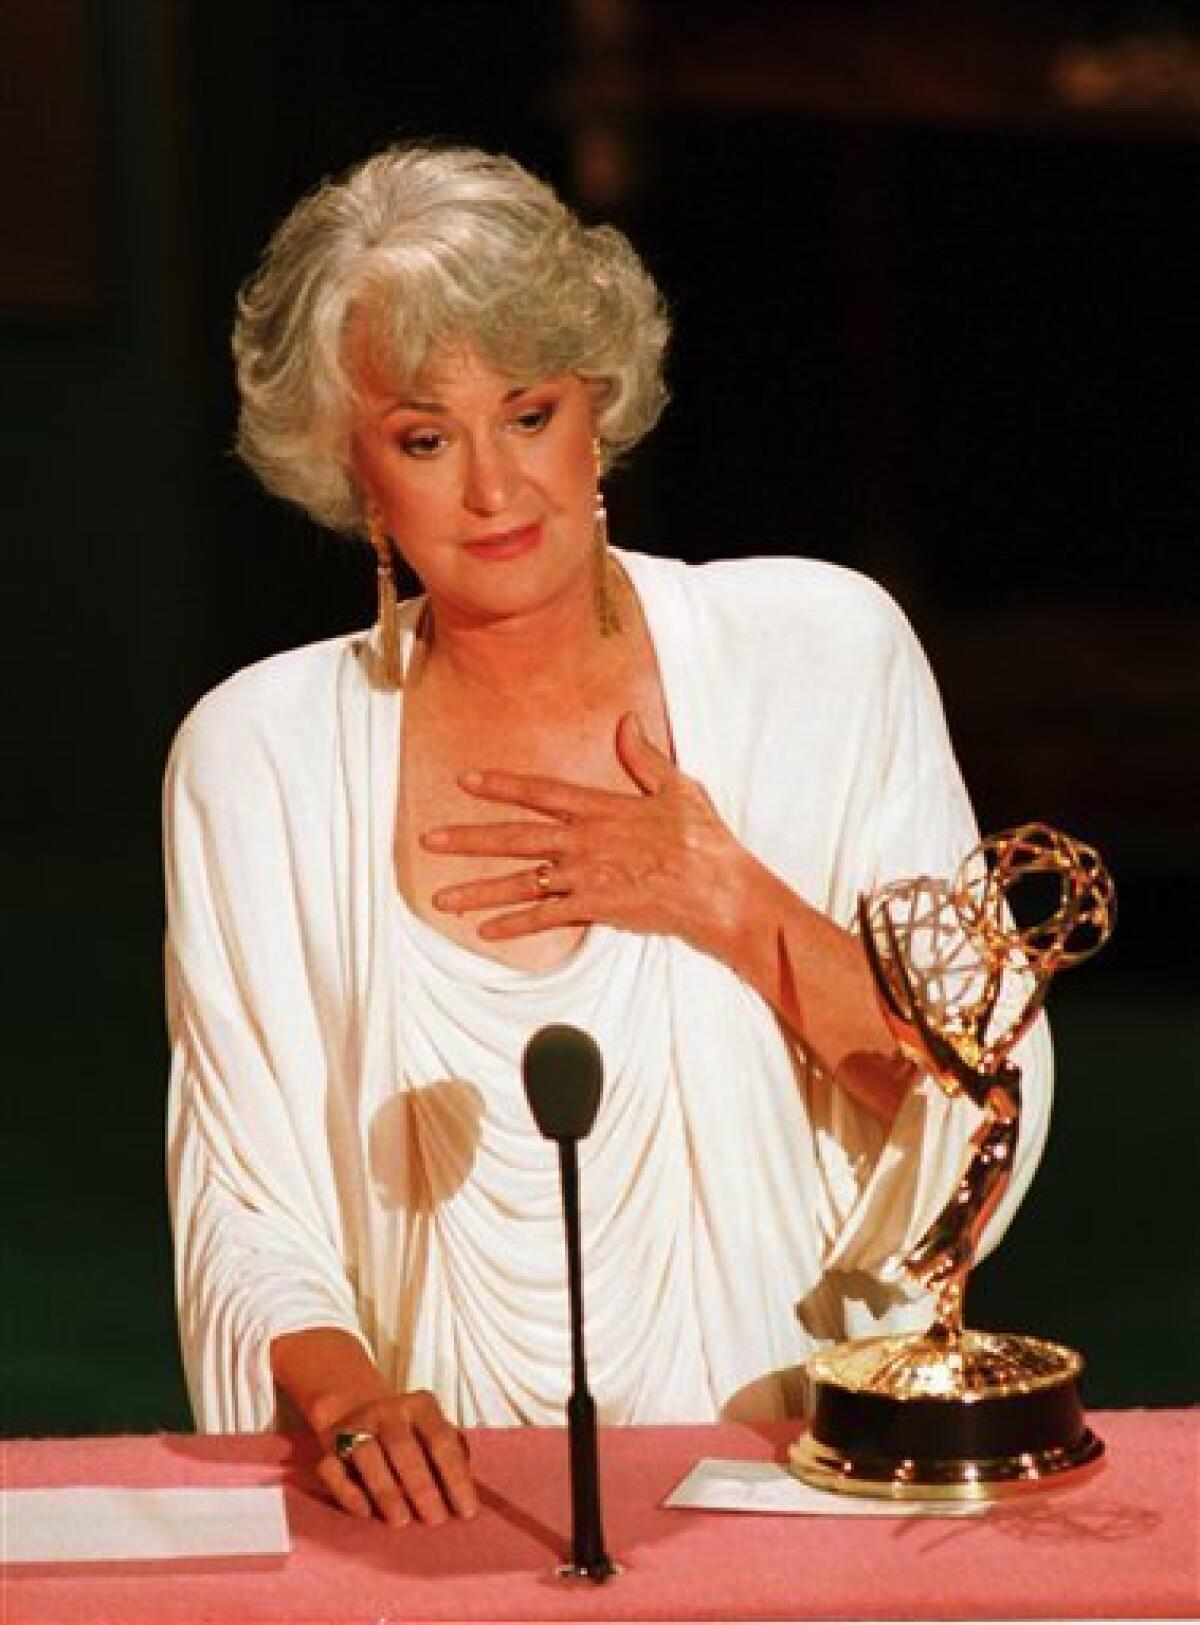 FILE - This Aug. 29, 1988 file photo shows actress Beatrice Arthur accepting her Emmy award at the 40th annual Emmy Awards ceremony in Pasadena, Ca. Family spokesman Dan Watt says the 86-year-old Arthur died at home early Saturday, April 25, 2009. He says Arthur had cancer, but declined to give further details. (AP Photo/Reed Saxon, File)